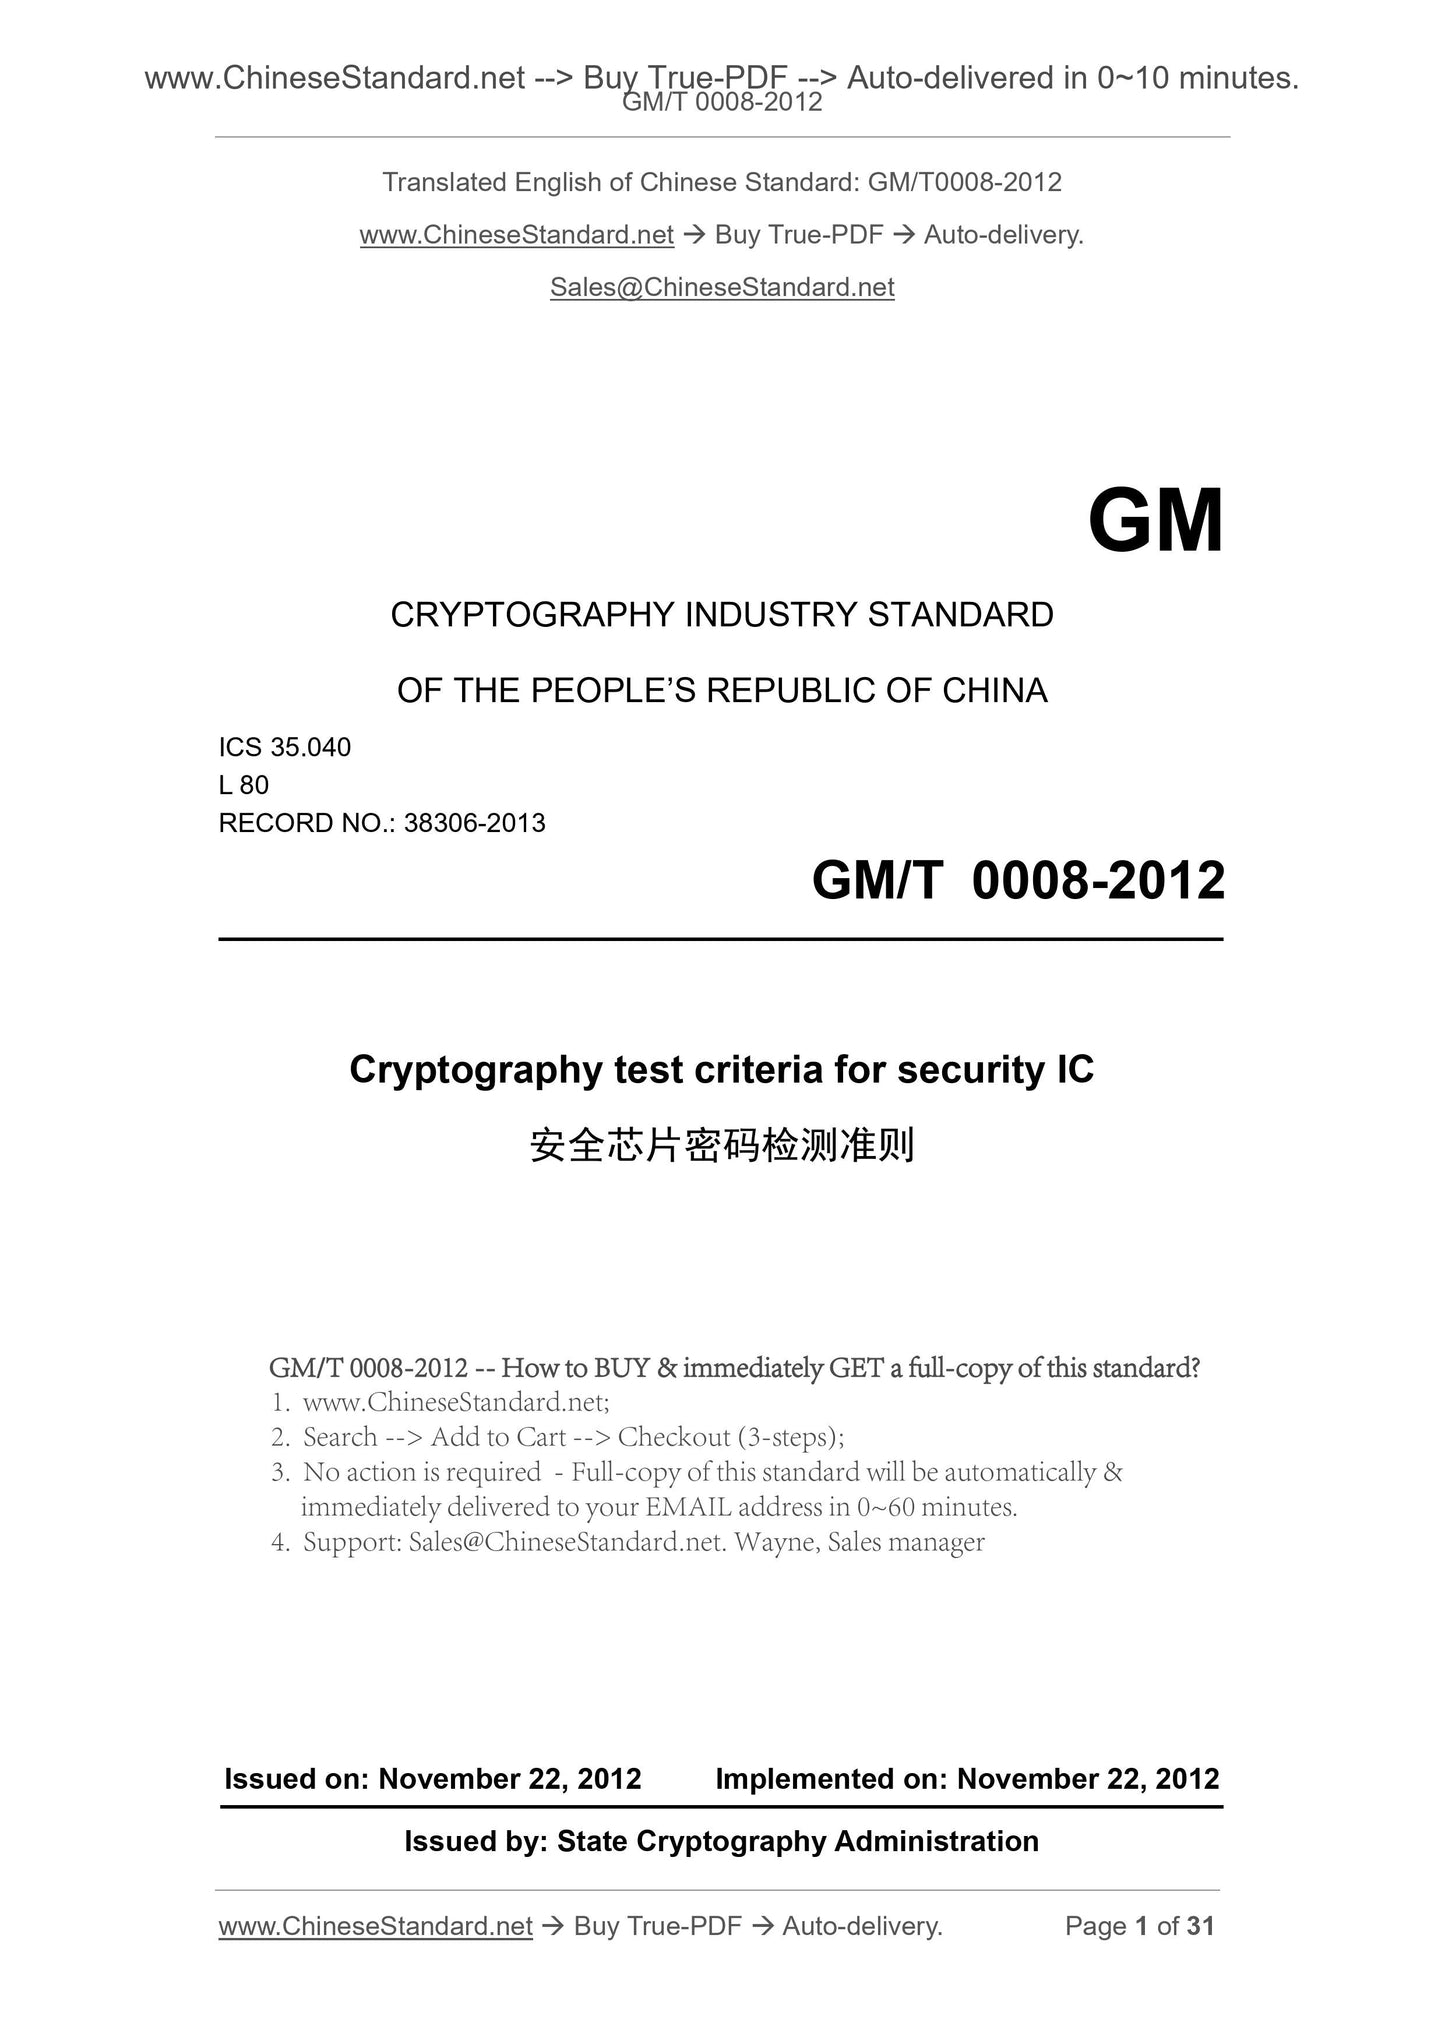 GM/T 0008-2012 Page 1